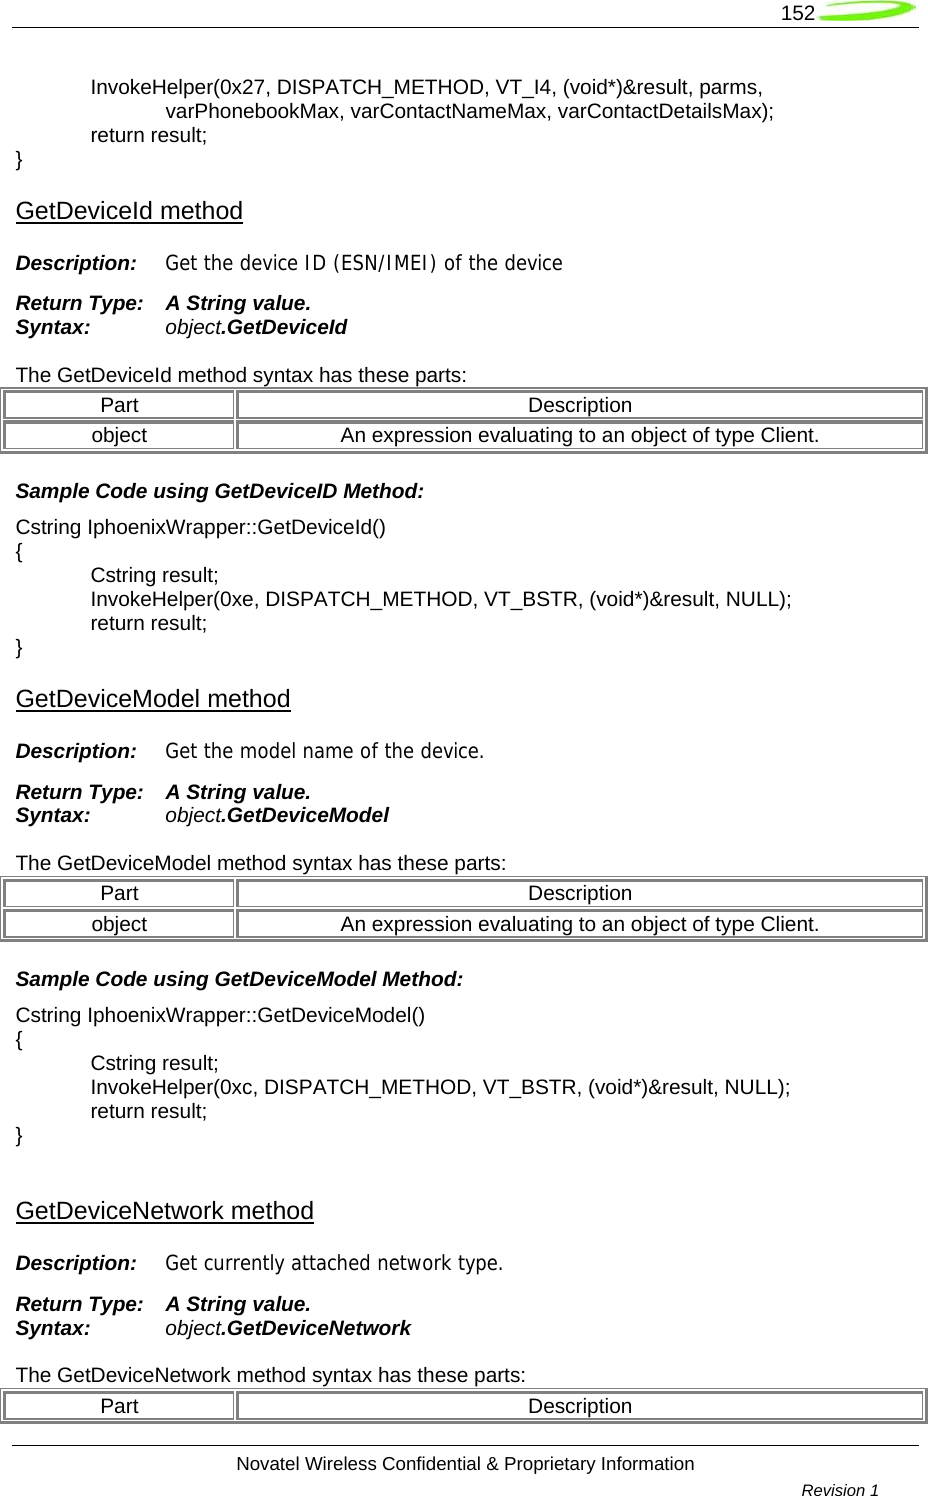   152  Novatel Wireless Confidential &amp; Proprietary Information        Revision 1    InvokeHelper(0x27, DISPATCH_METHOD, VT_I4, (void*)&amp;result, parms,   varPhonebookMax, varContactNameMax, varContactDetailsMax);  return result; } GetDeviceId method Description:  Get the device ID (ESN/IMEI) of the device Return Type:  A String value. Syntax:  object.GetDeviceId  The GetDeviceId method syntax has these parts: Part Description object  An expression evaluating to an object of type Client. Sample Code using GetDeviceID Method: Cstring IphoenixWrapper::GetDeviceId() {  Cstring result;  InvokeHelper(0xe, DISPATCH_METHOD, VT_BSTR, (void*)&amp;result, NULL);  return result; } GetDeviceModel method Description:  Get the model name of the device. Return Type:  A String value. Syntax:  object.GetDeviceModel  The GetDeviceModel method syntax has these parts: Part Description object  An expression evaluating to an object of type Client. Sample Code using GetDeviceModel Method: Cstring IphoenixWrapper::GetDeviceModel() {  Cstring result;  InvokeHelper(0xc, DISPATCH_METHOD, VT_BSTR, (void*)&amp;result, NULL);  return result; }  GetDeviceNetwork method Description:  Get currently attached network type. Return Type:  A String value. Syntax:  object.GetDeviceNetwork  The GetDeviceNetwork method syntax has these parts: Part Description 